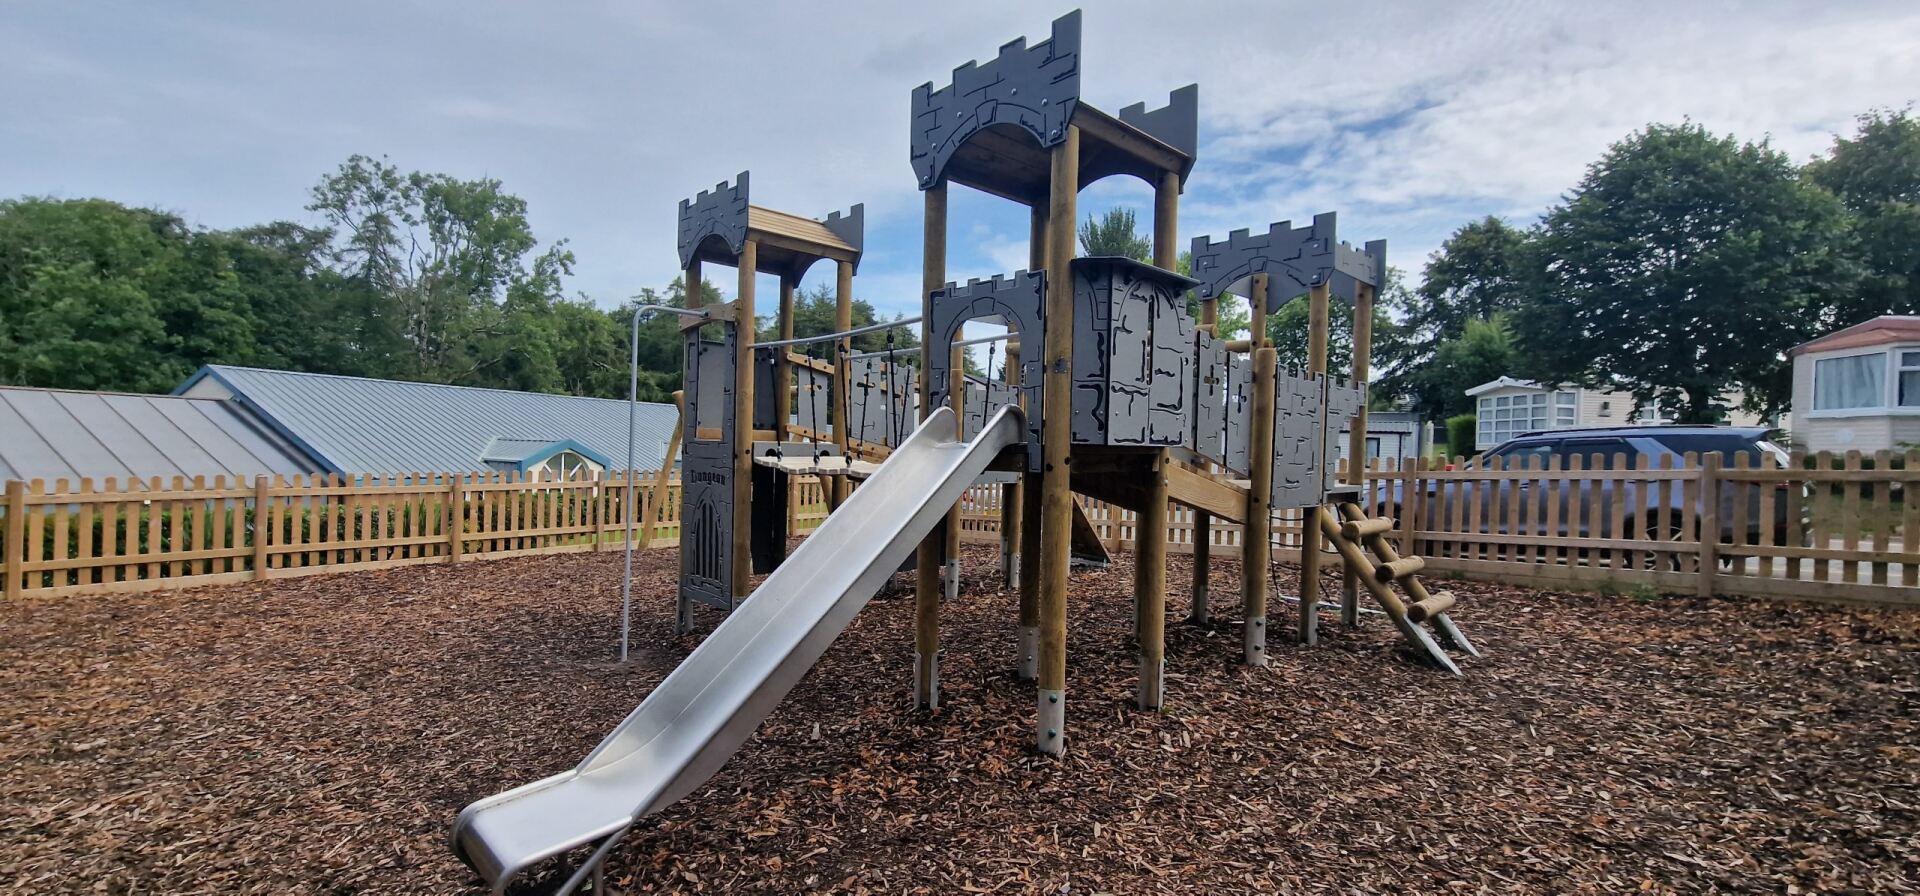 A play tower that has been installed at Brynteg Holiday Park by Pentagon Play